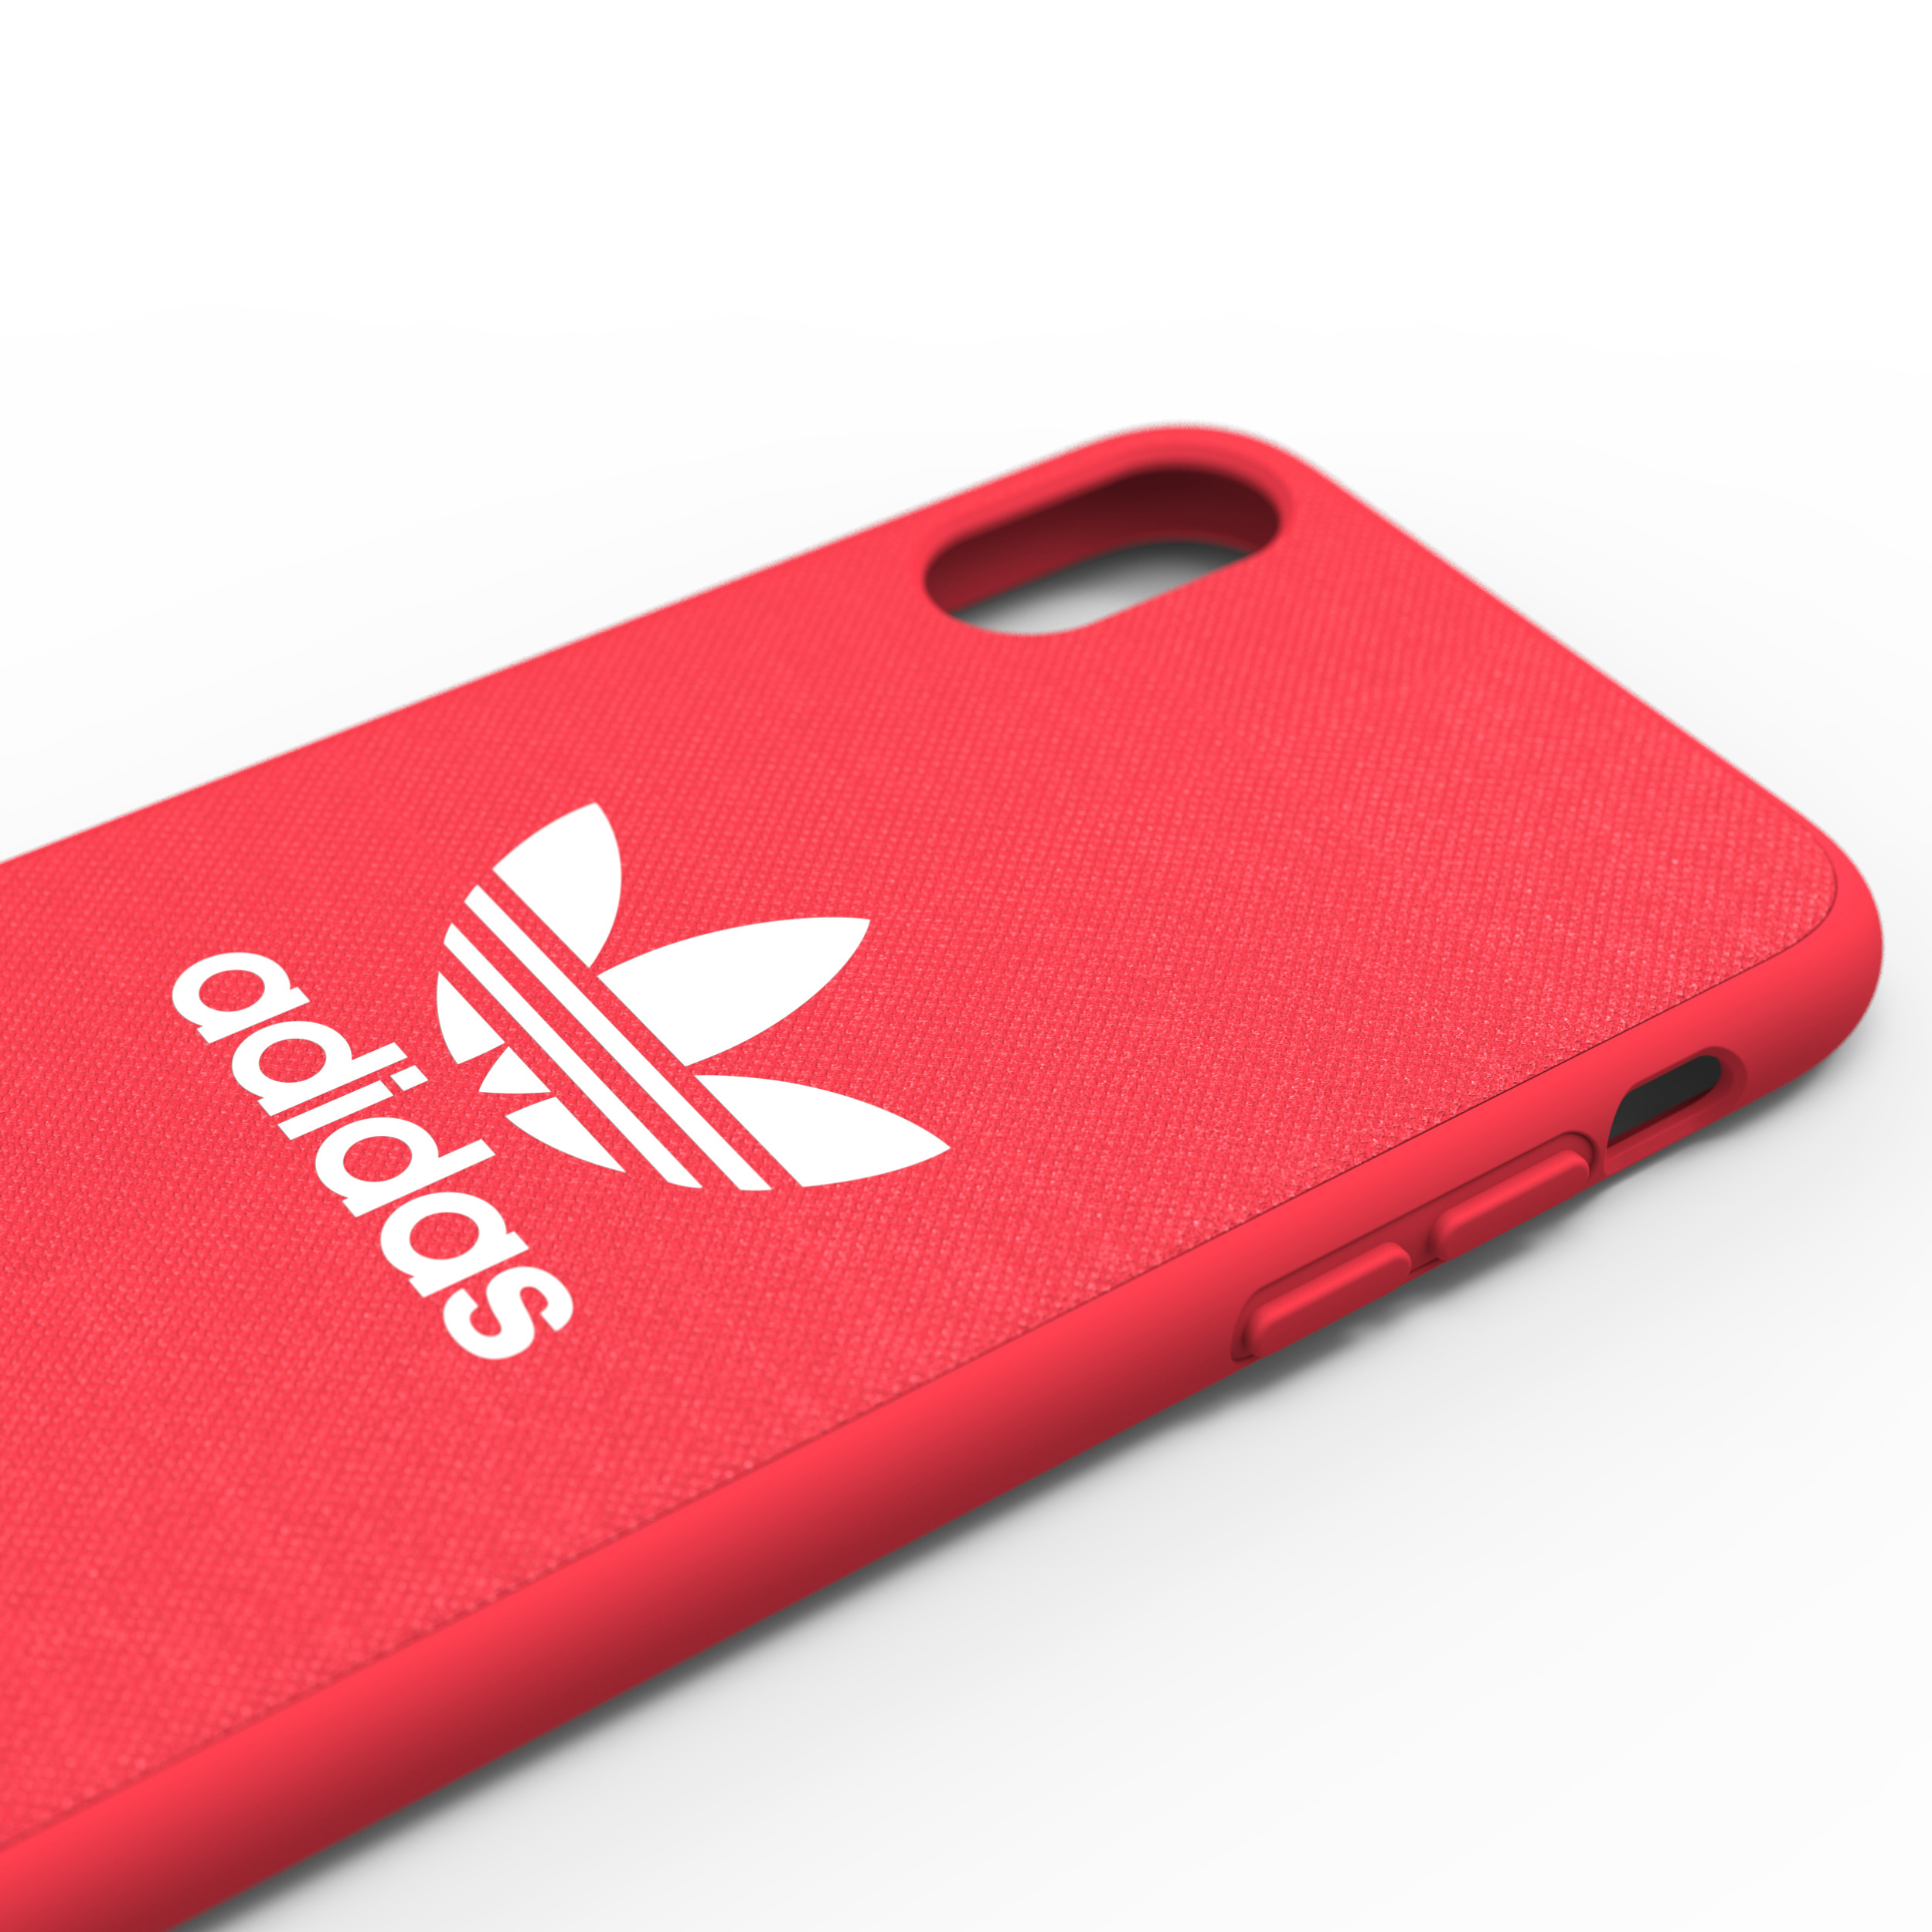 Rot Moulded Apple, Backcover, X, iPhone ADIDAS Case, ORIGINALS